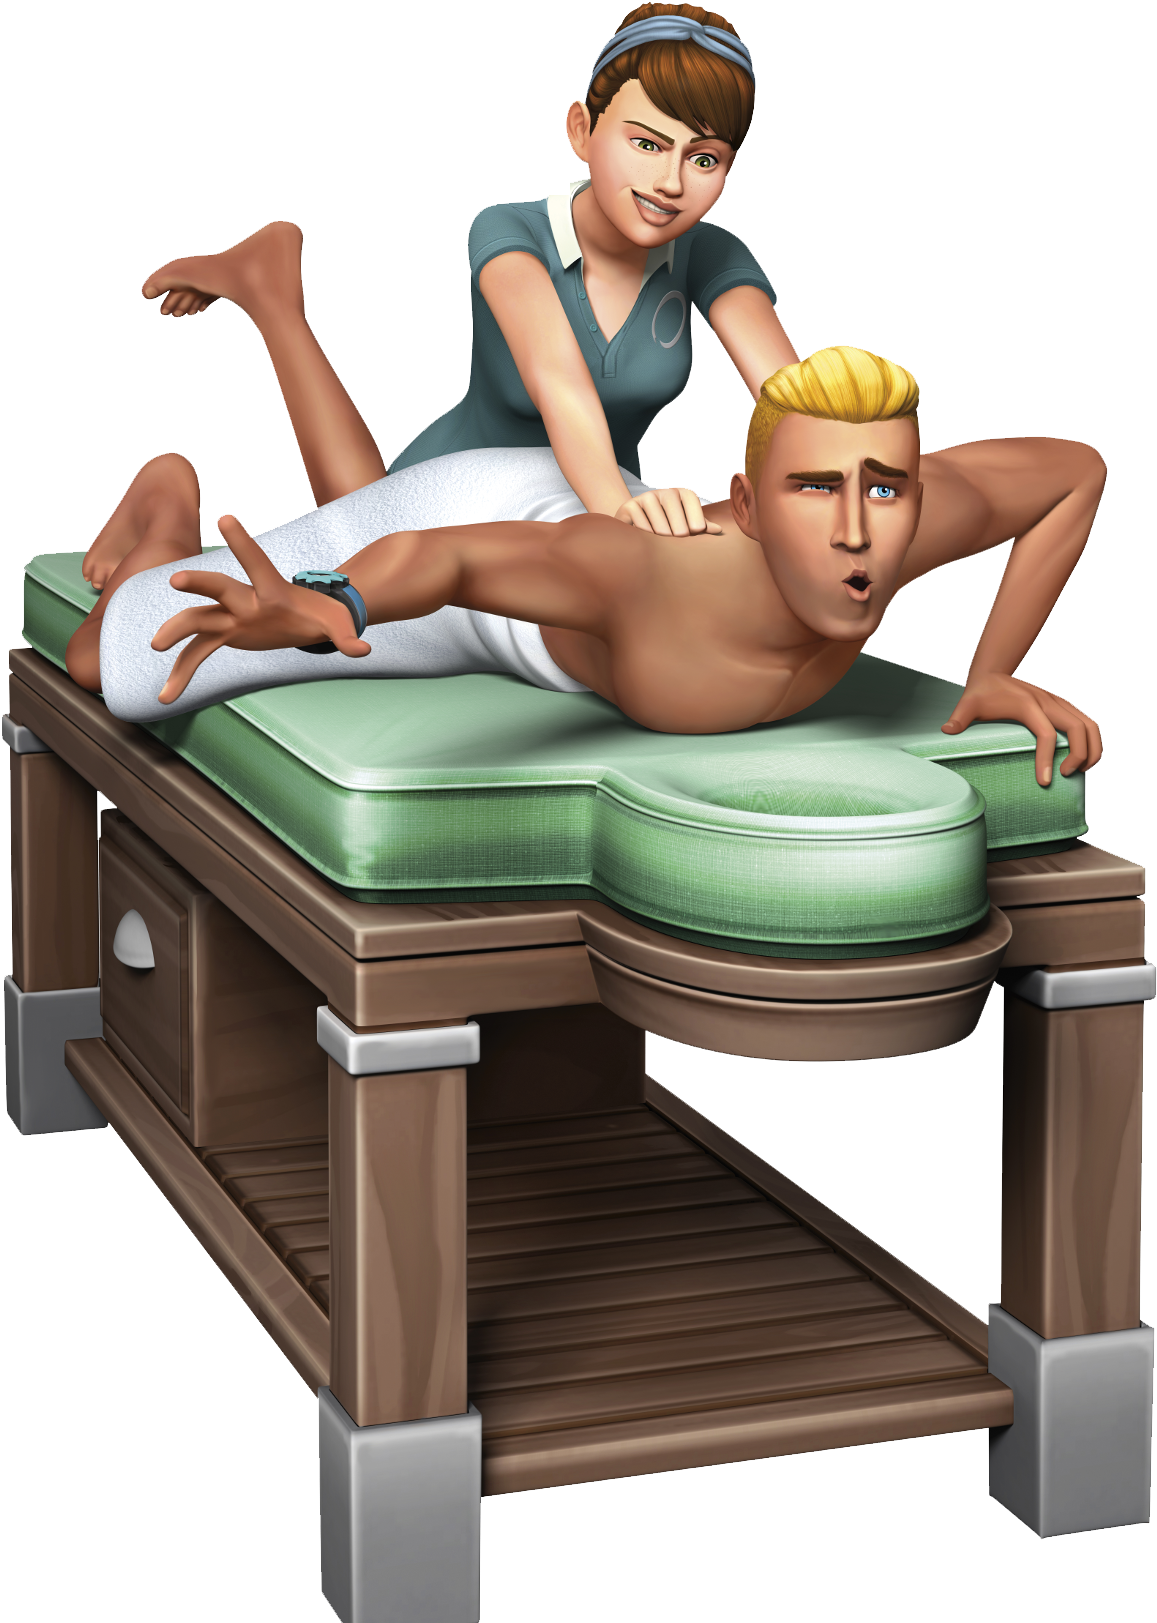 Sims Spa Day (1428x1713)